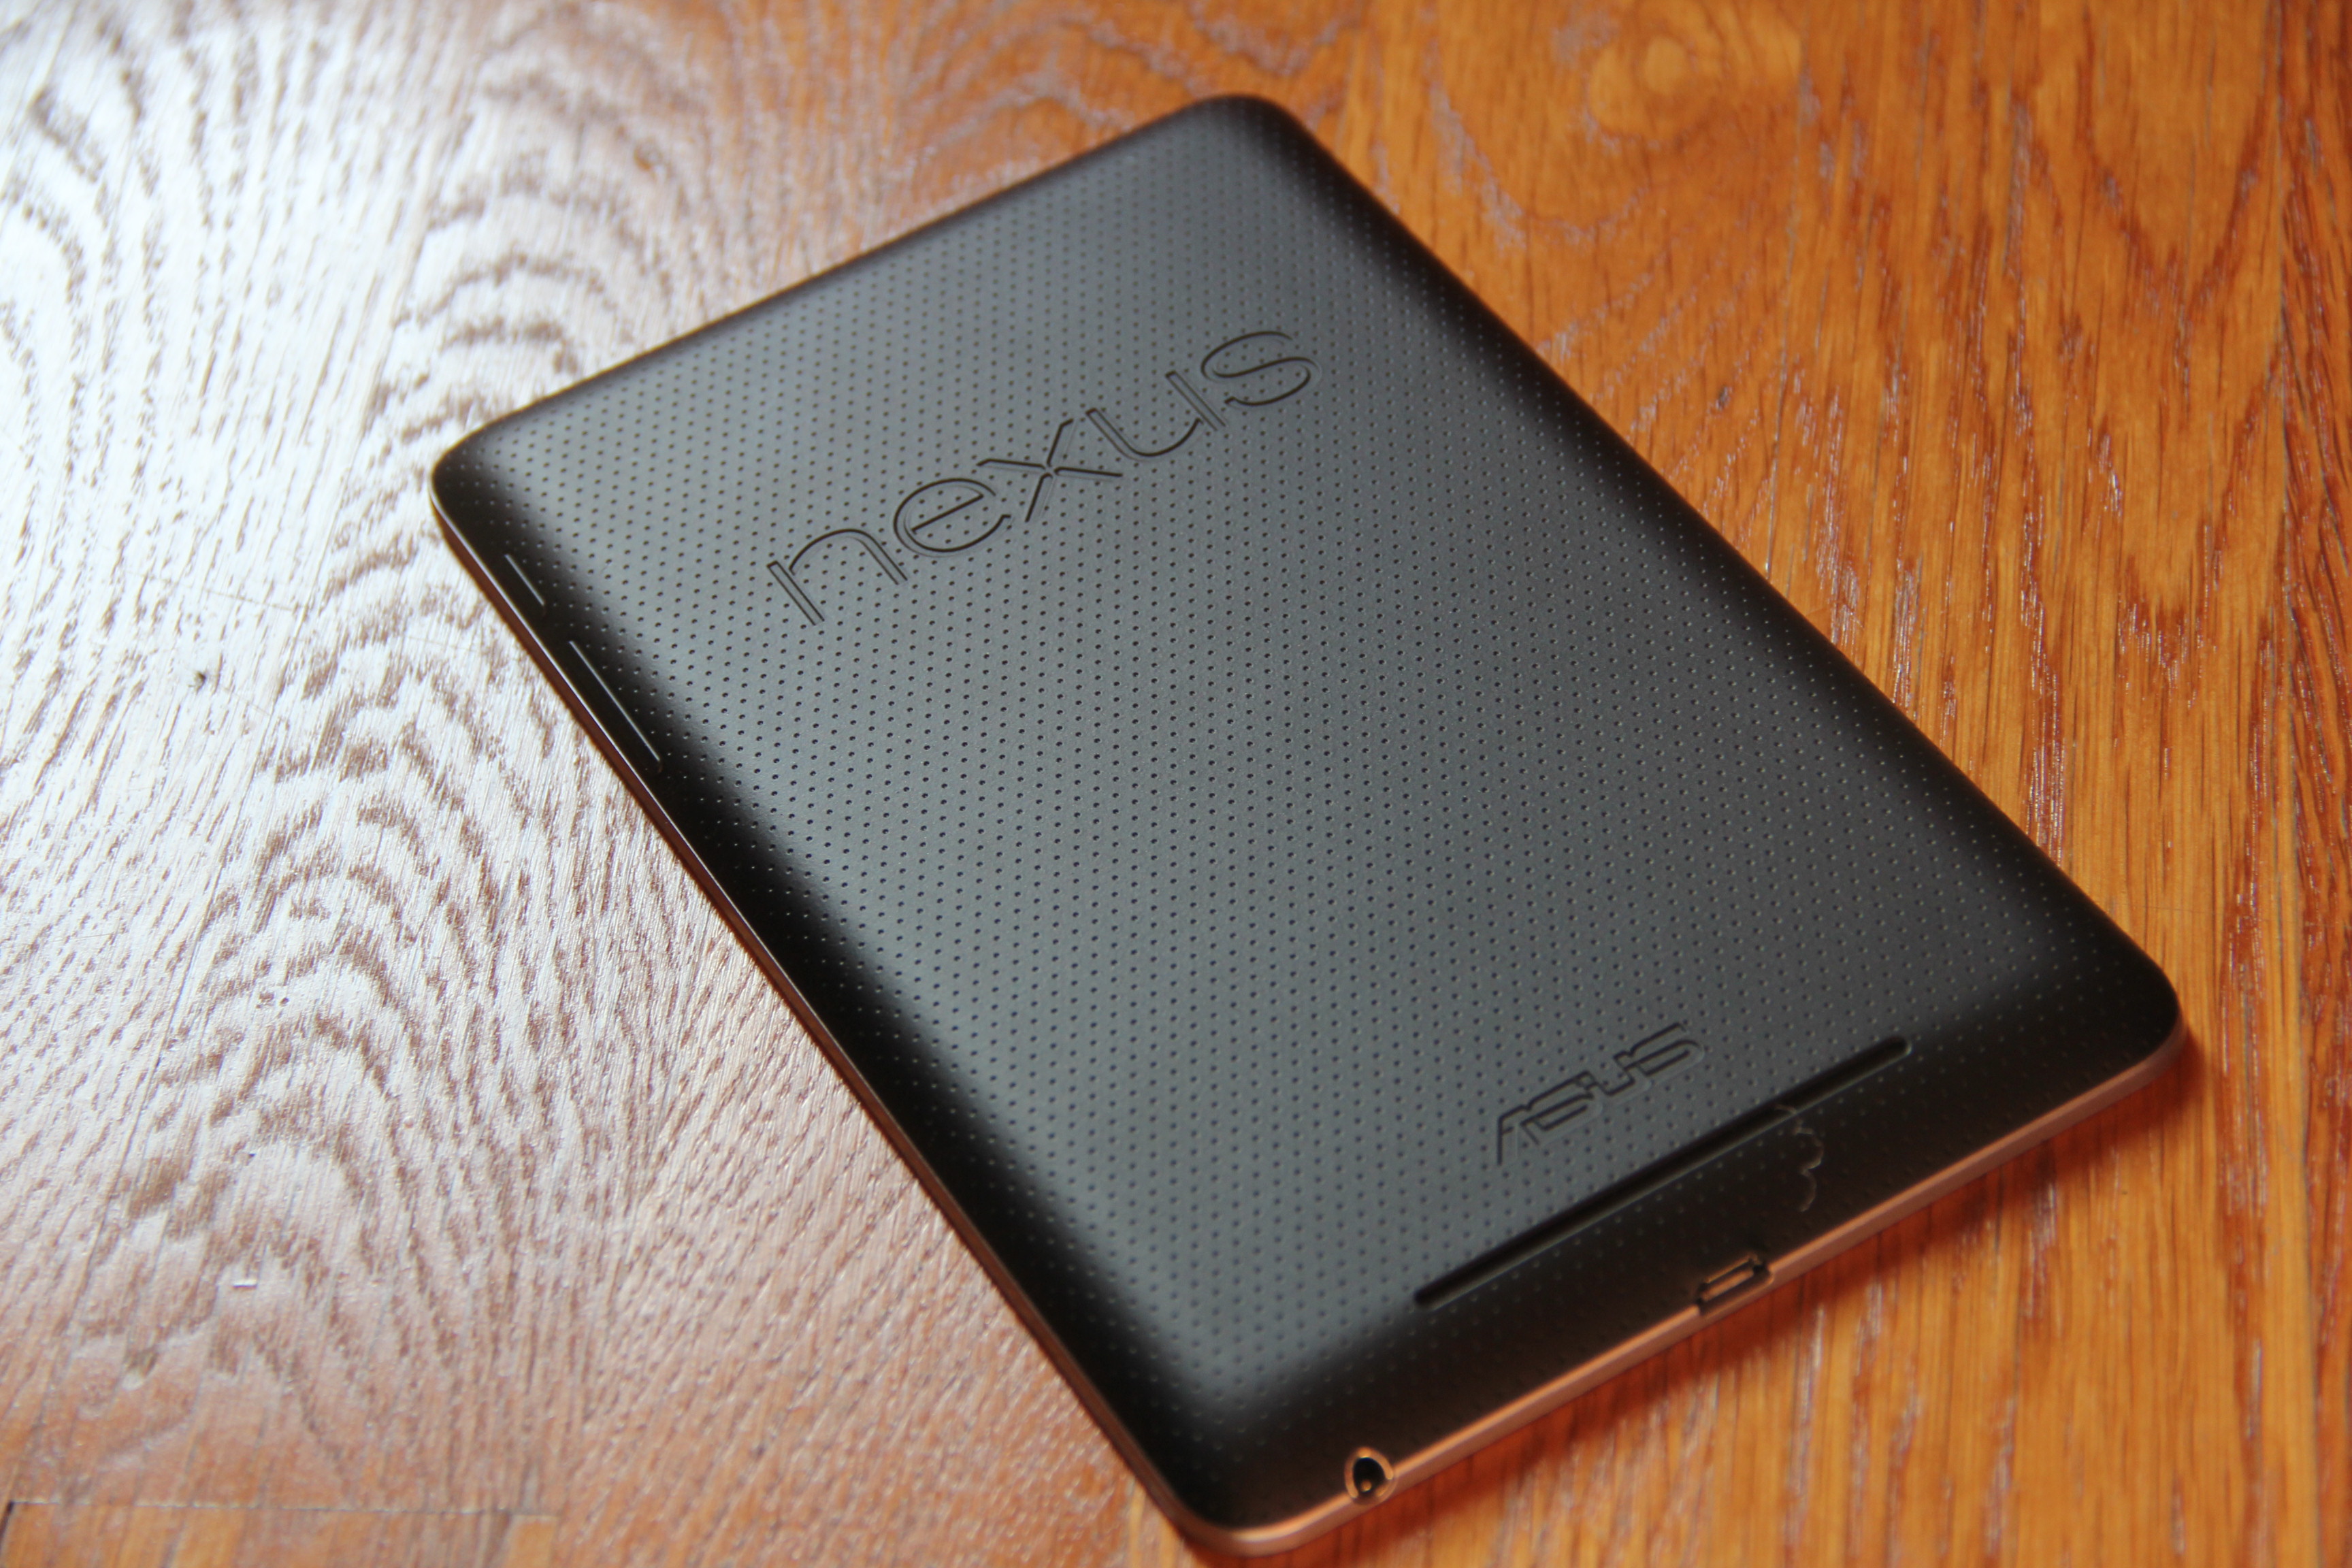 Tips And Tricks For New Google Nexus 7 (2013)